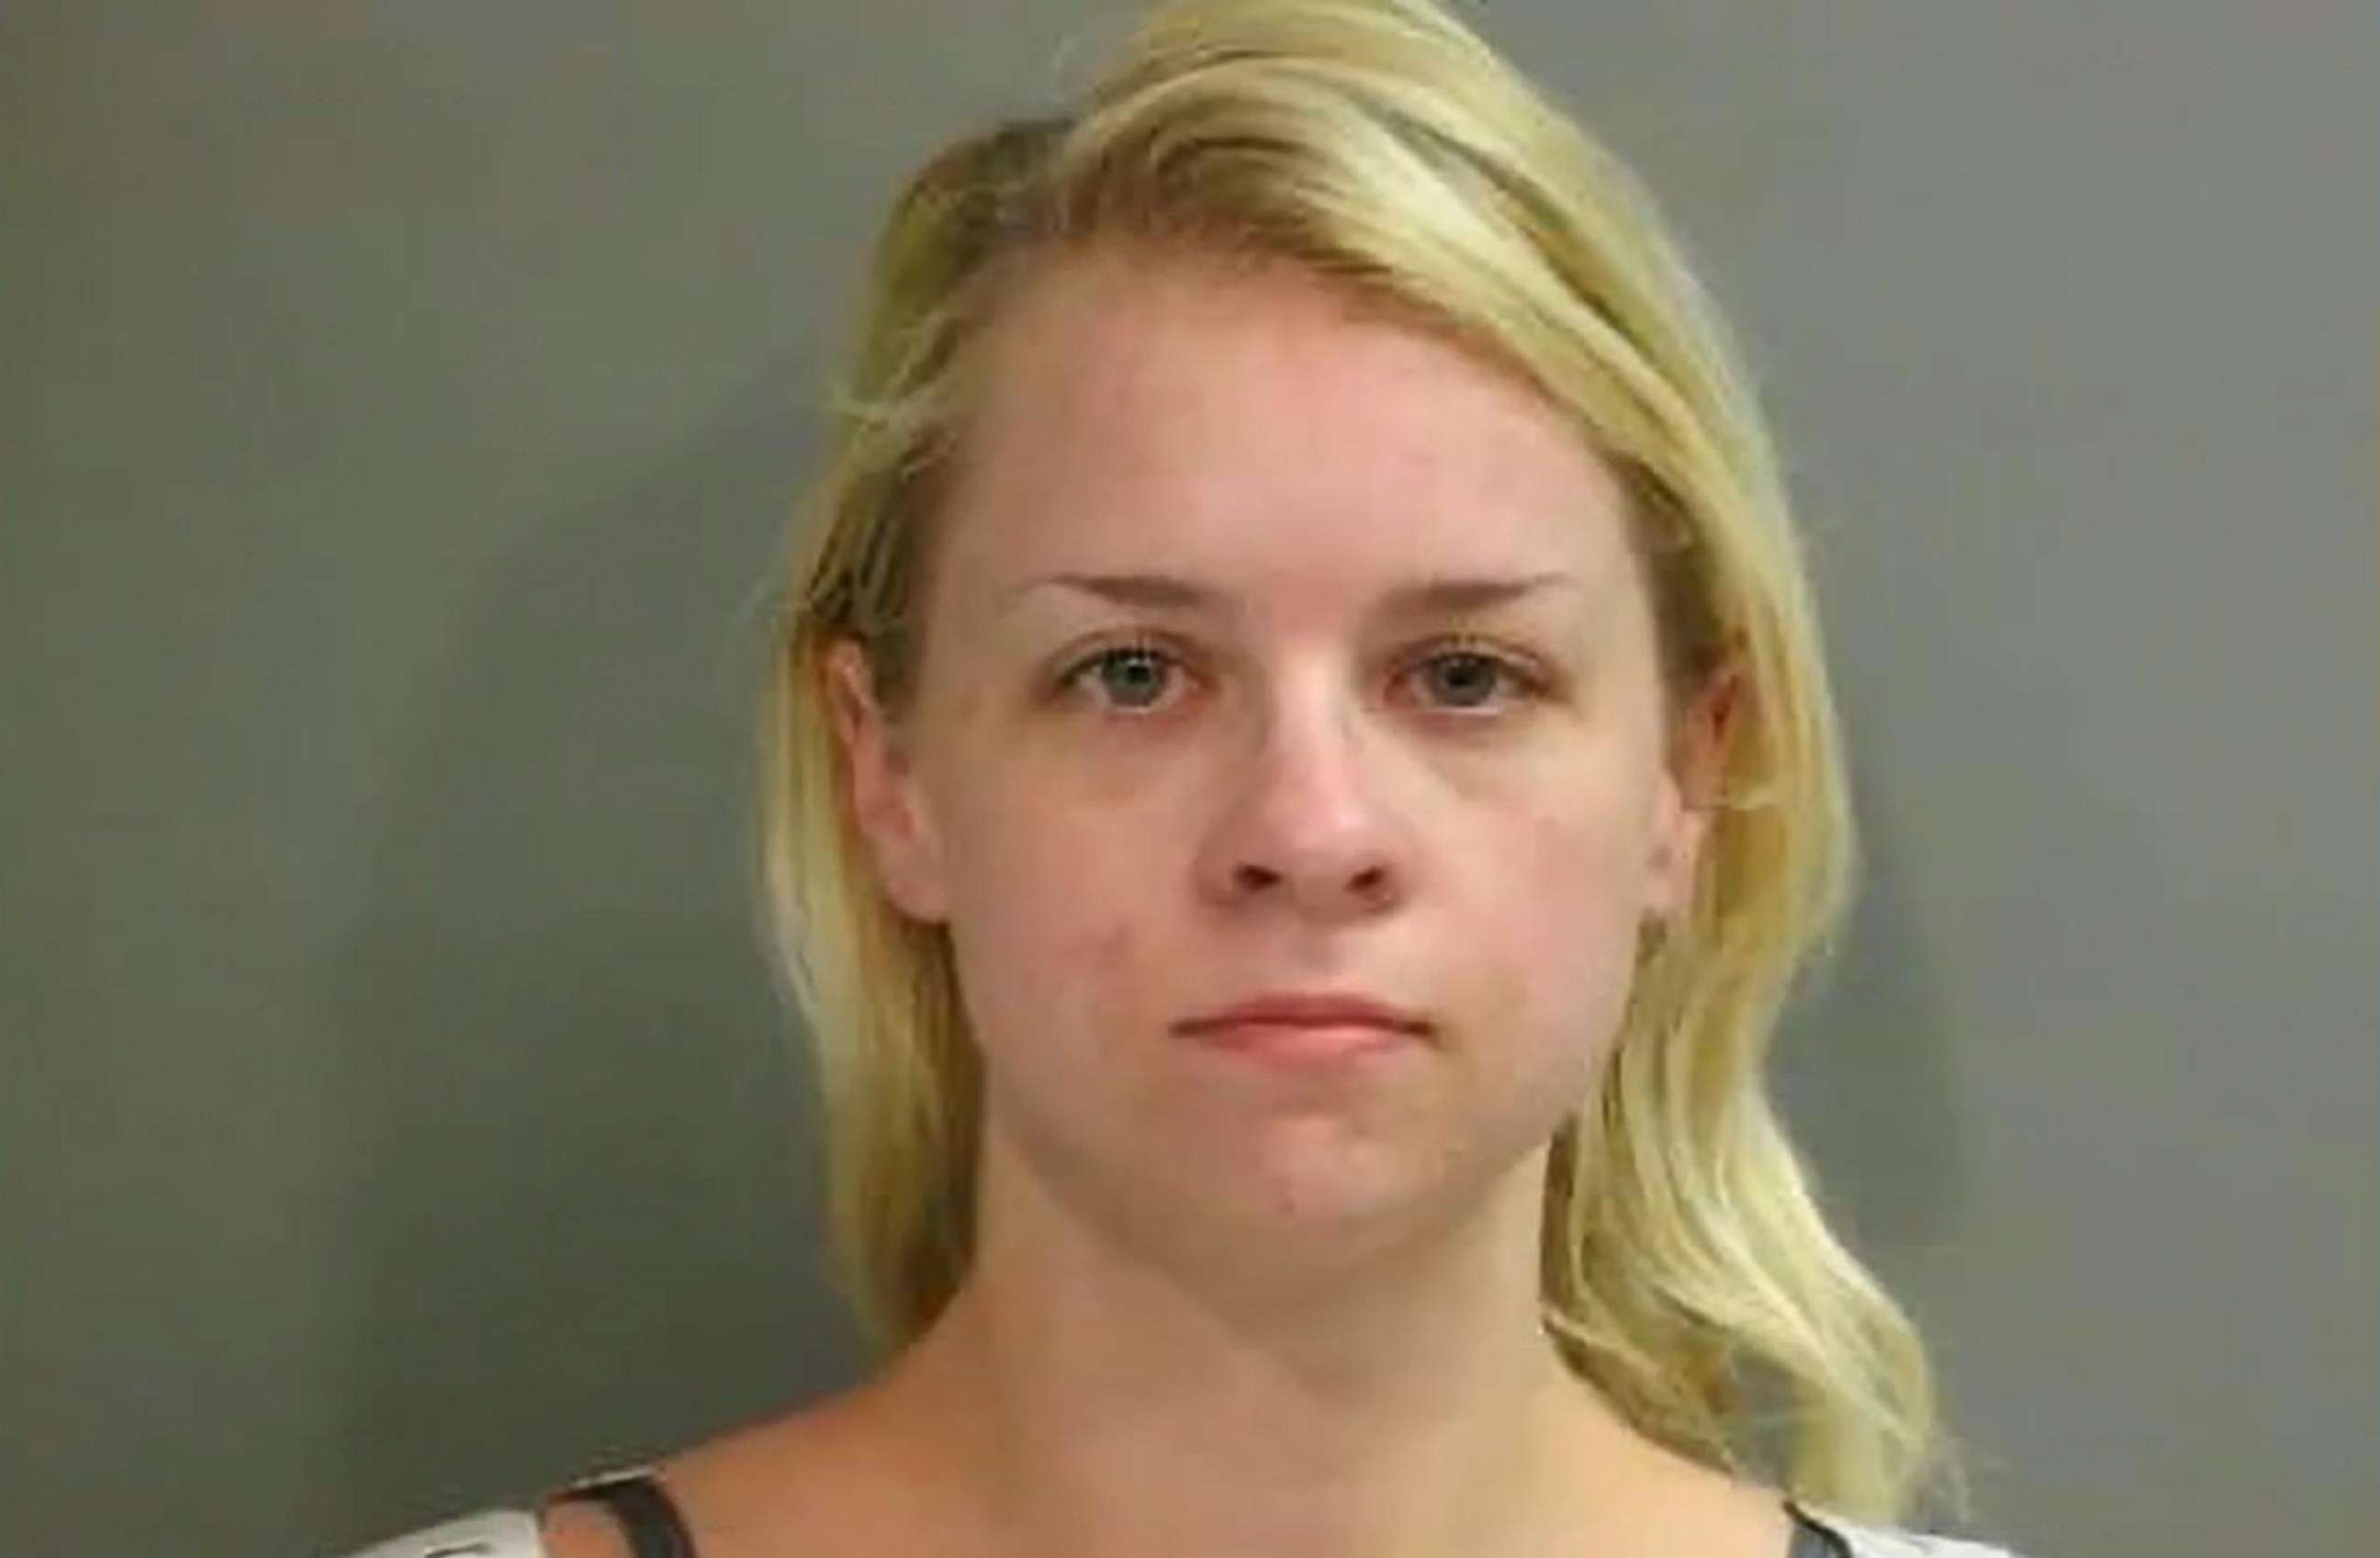 PHOTO: Maxine Feldstein, 30, was arrested by Arkansas police on Aug, 17, 2018, after allegedly posing as an officer to help her boyfriend escape from jail.